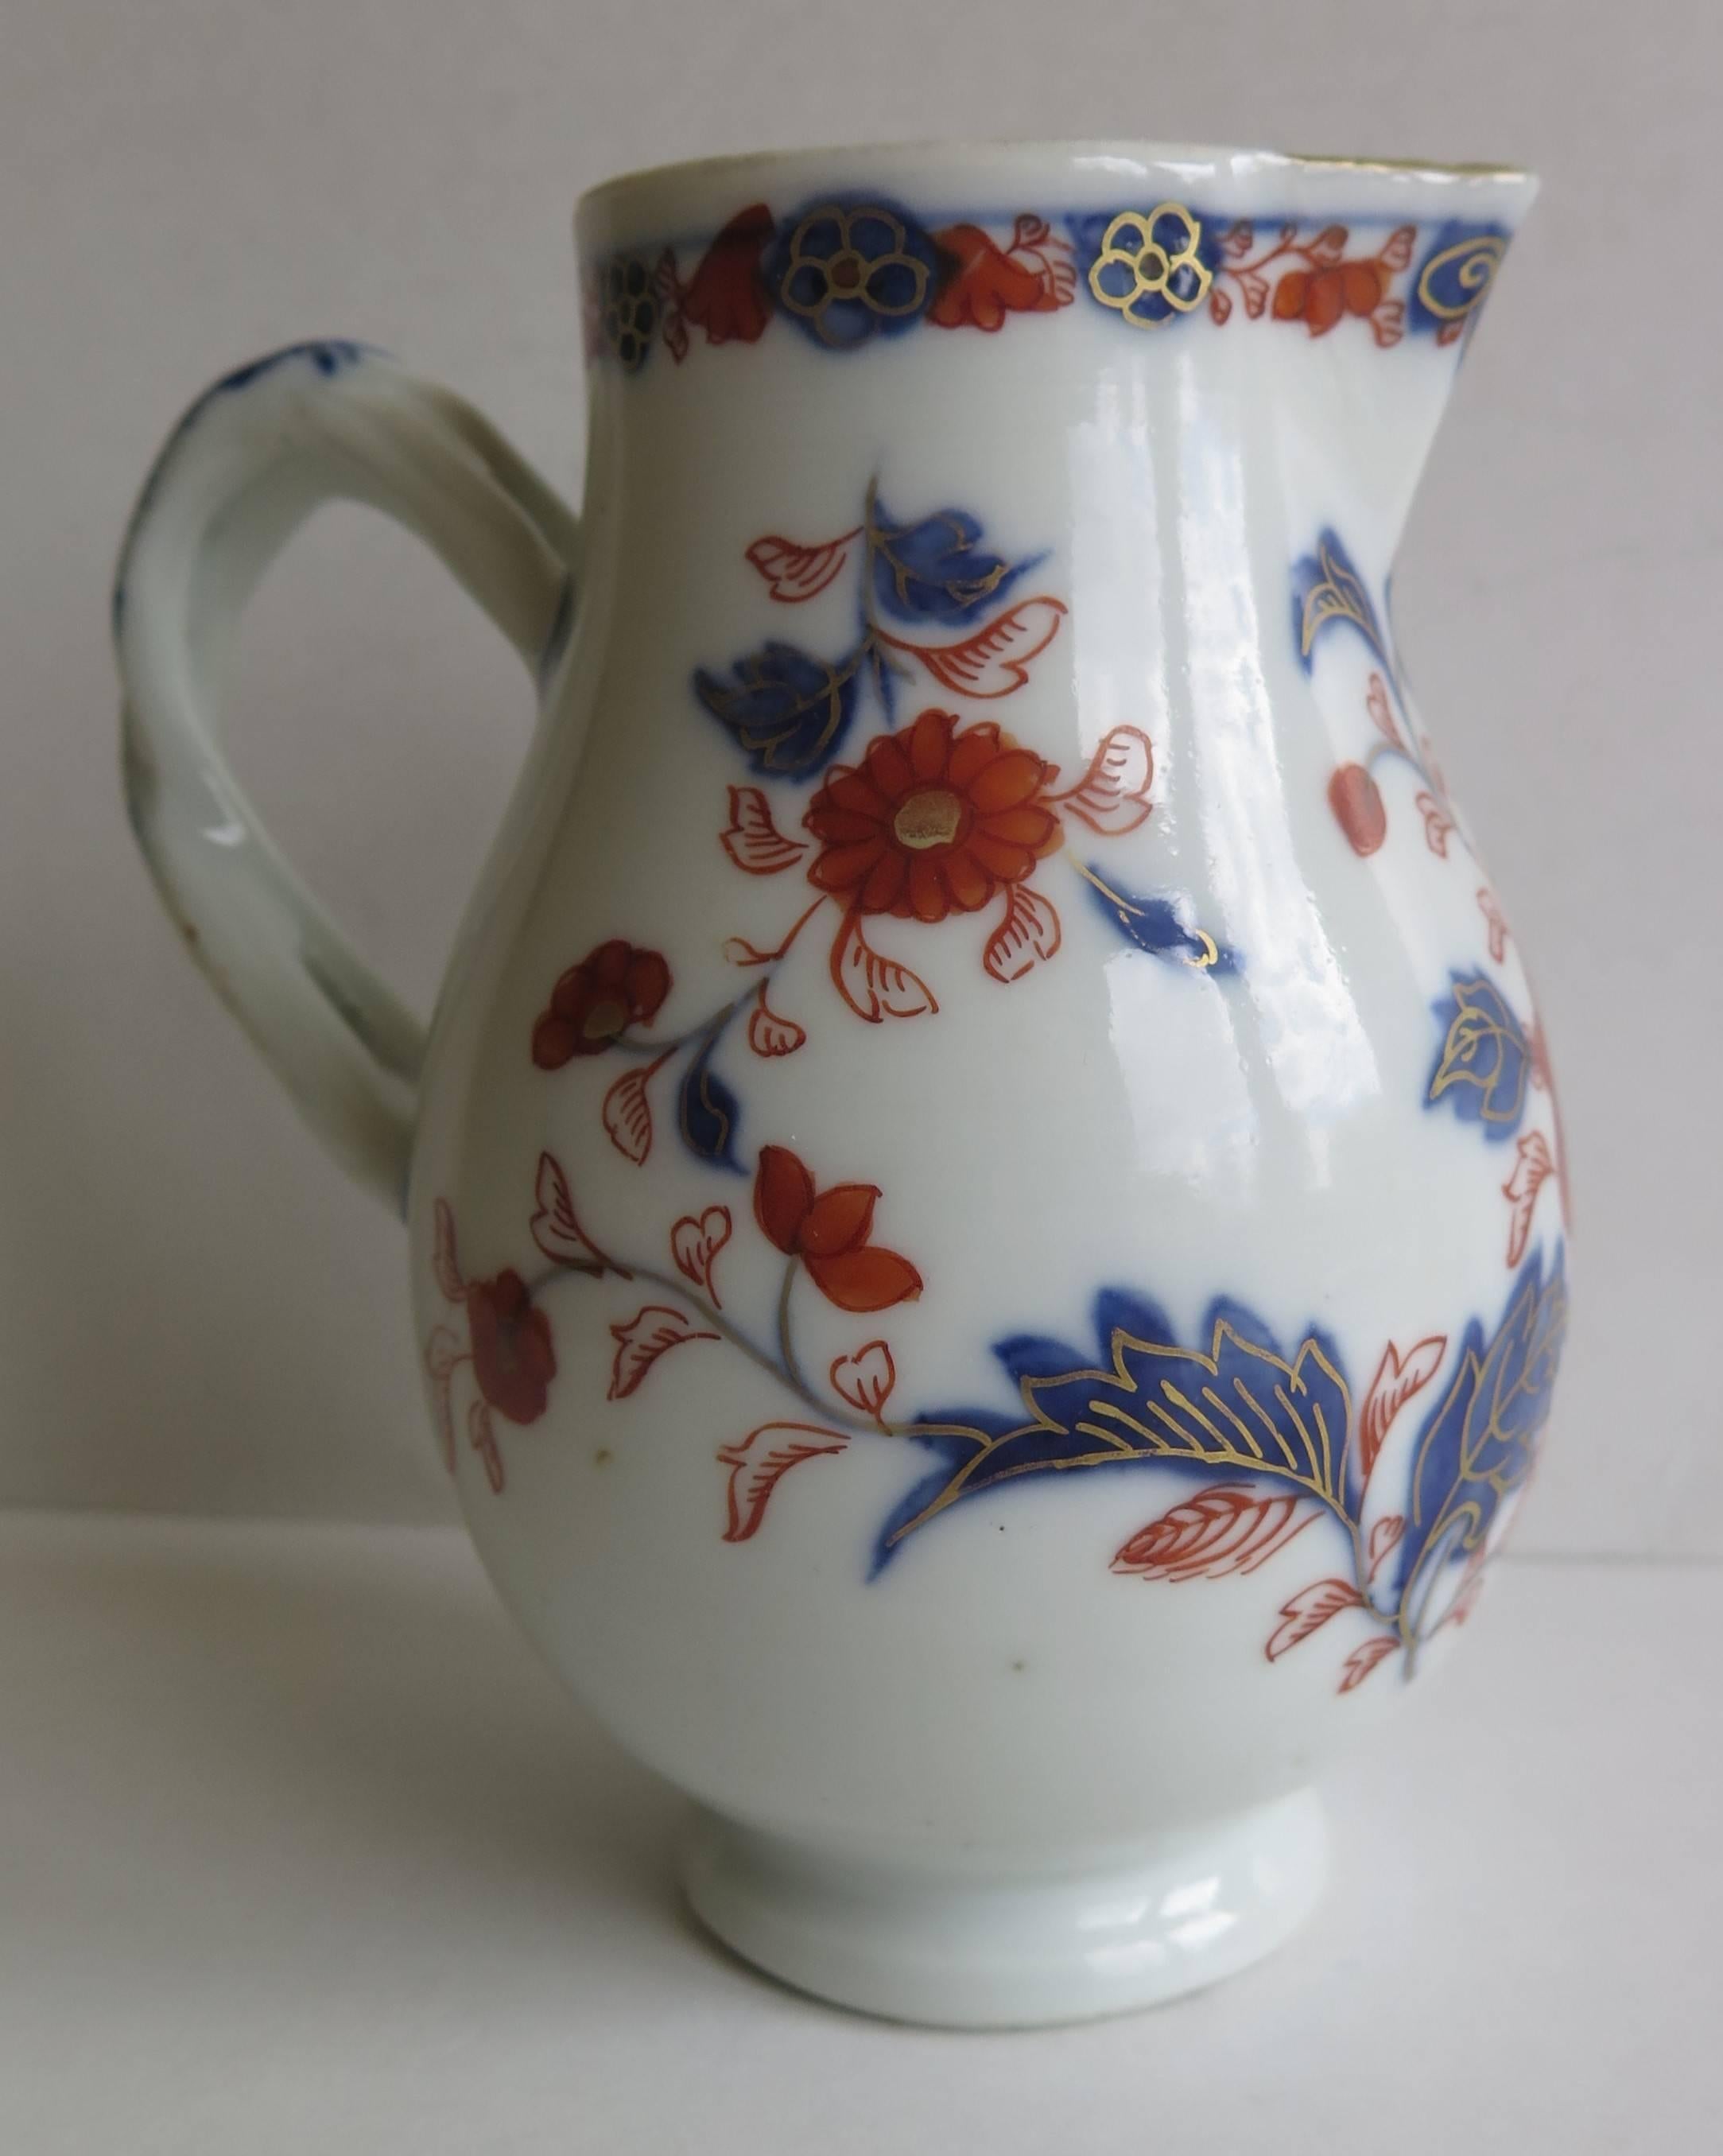 This is a Chinese porcelain, hand painted, Sparrow-beak milk or cream jug / pitcher from the early-mid-18th century, Qing dynasty, circa 1730.

The jug is pear shaped with a Sparrow beak spout and very nice entwined simulated rope handle.

The